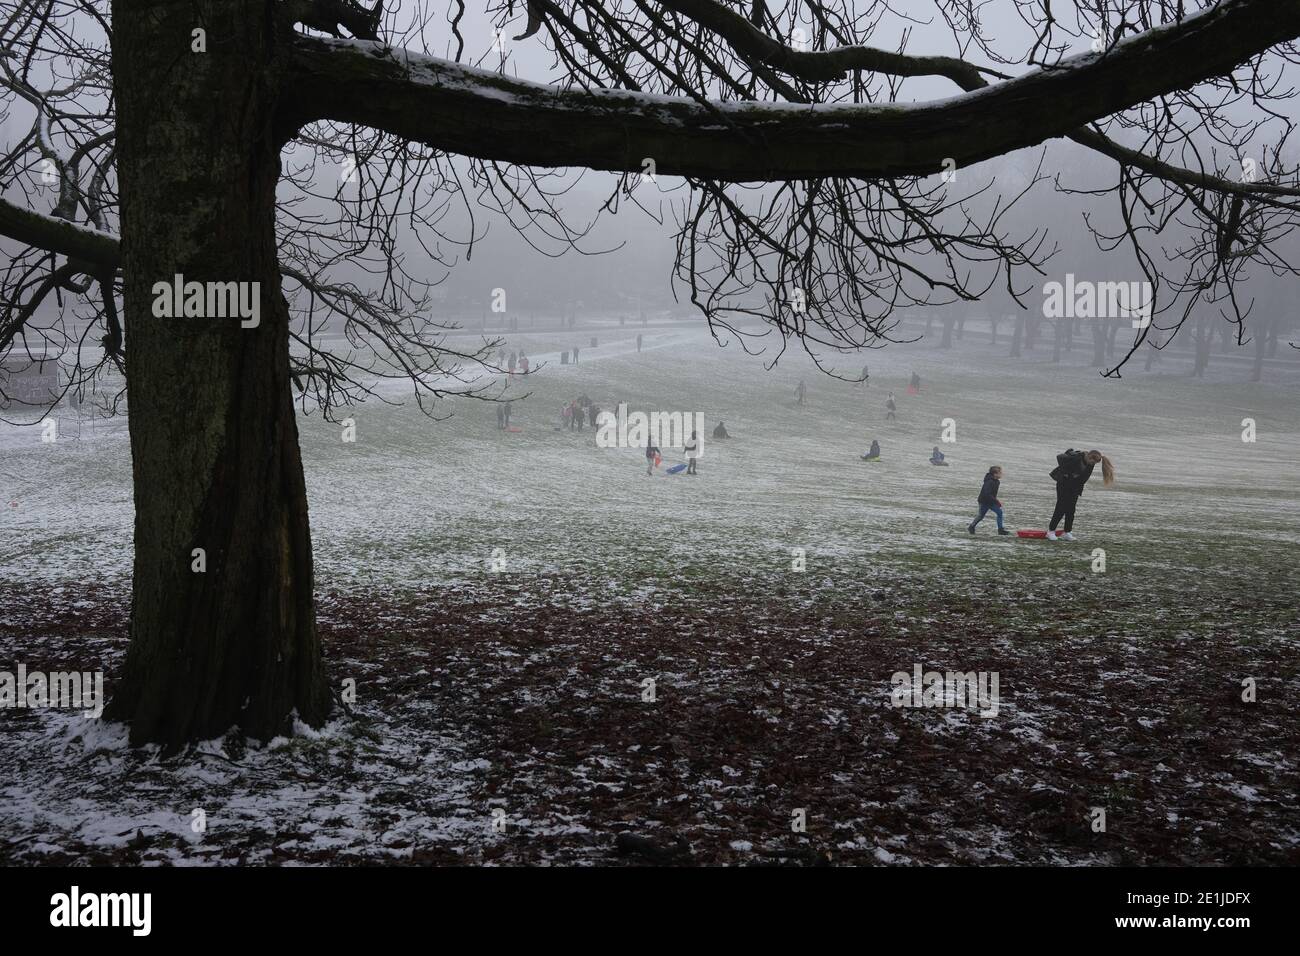 Glasgow, UK, 7 January 2021. People enjoy the fresh air, light snow and misty conditions, an escape from lockdown, with a trip to Queen's Park in the south of the city. Photo credit: Jeremy Sutton-Hibbert/Alamy Live News Stock Photo